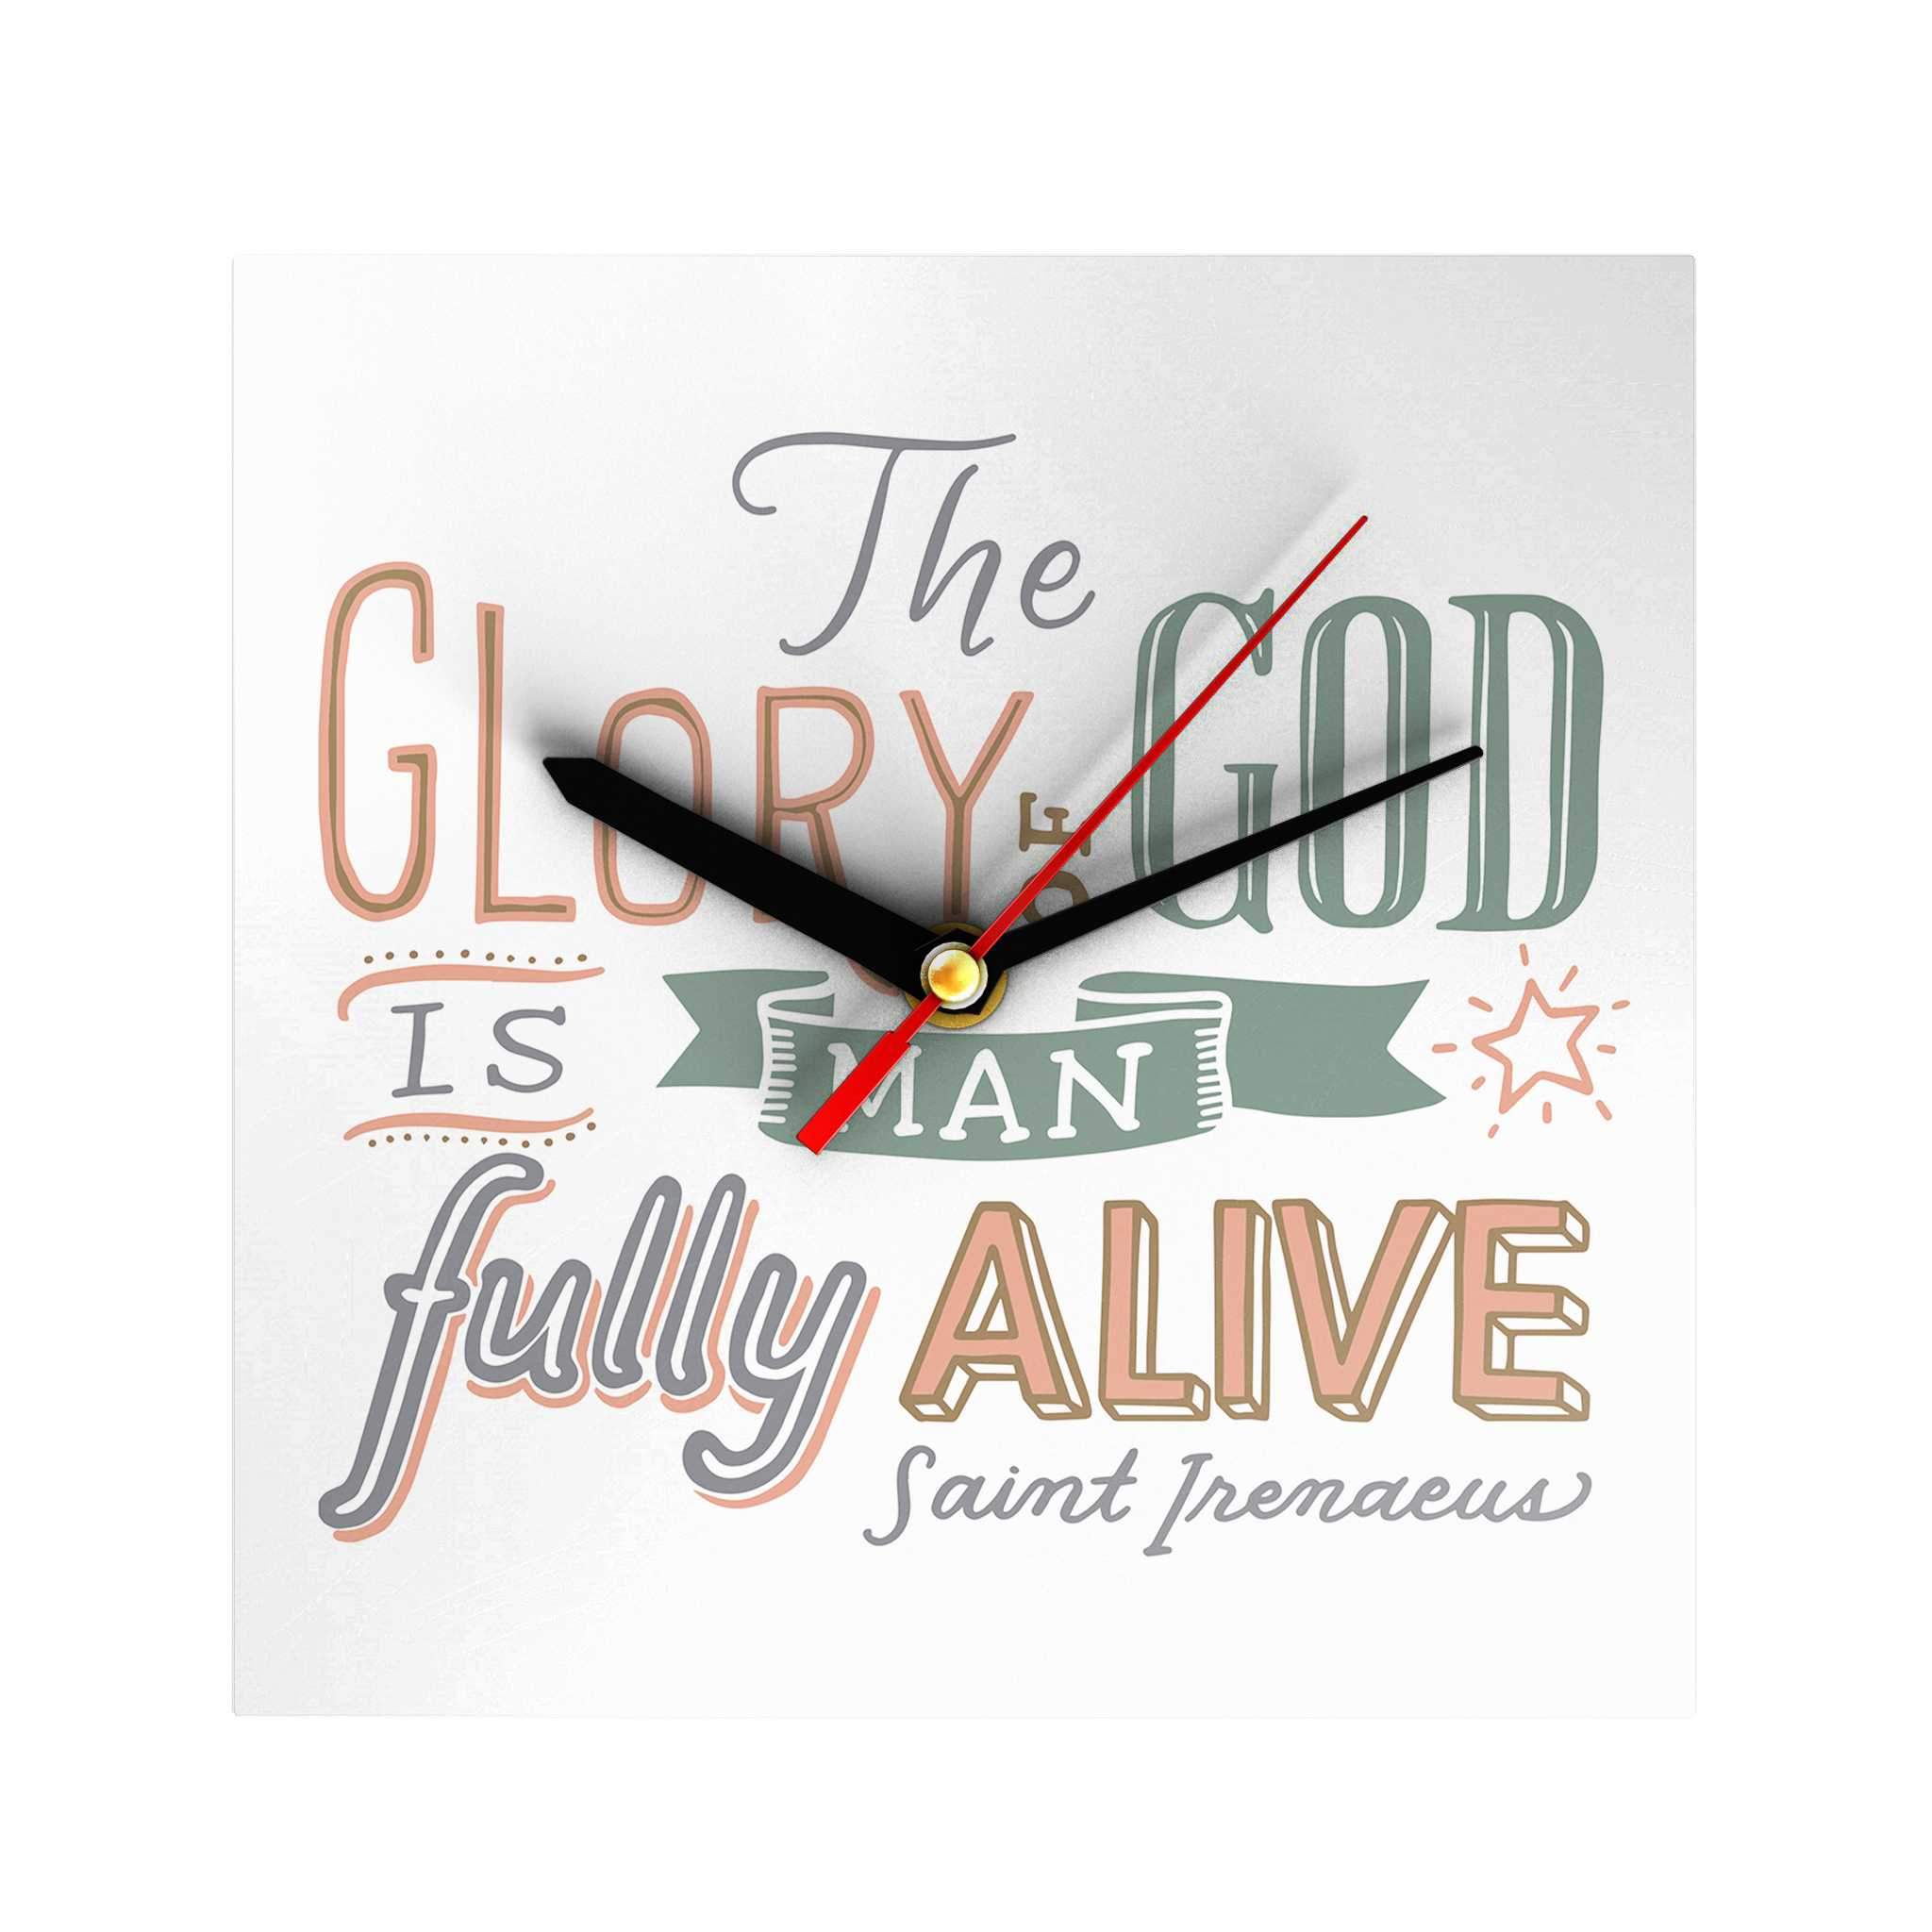 Words That Inspire Clock: The Glory of God